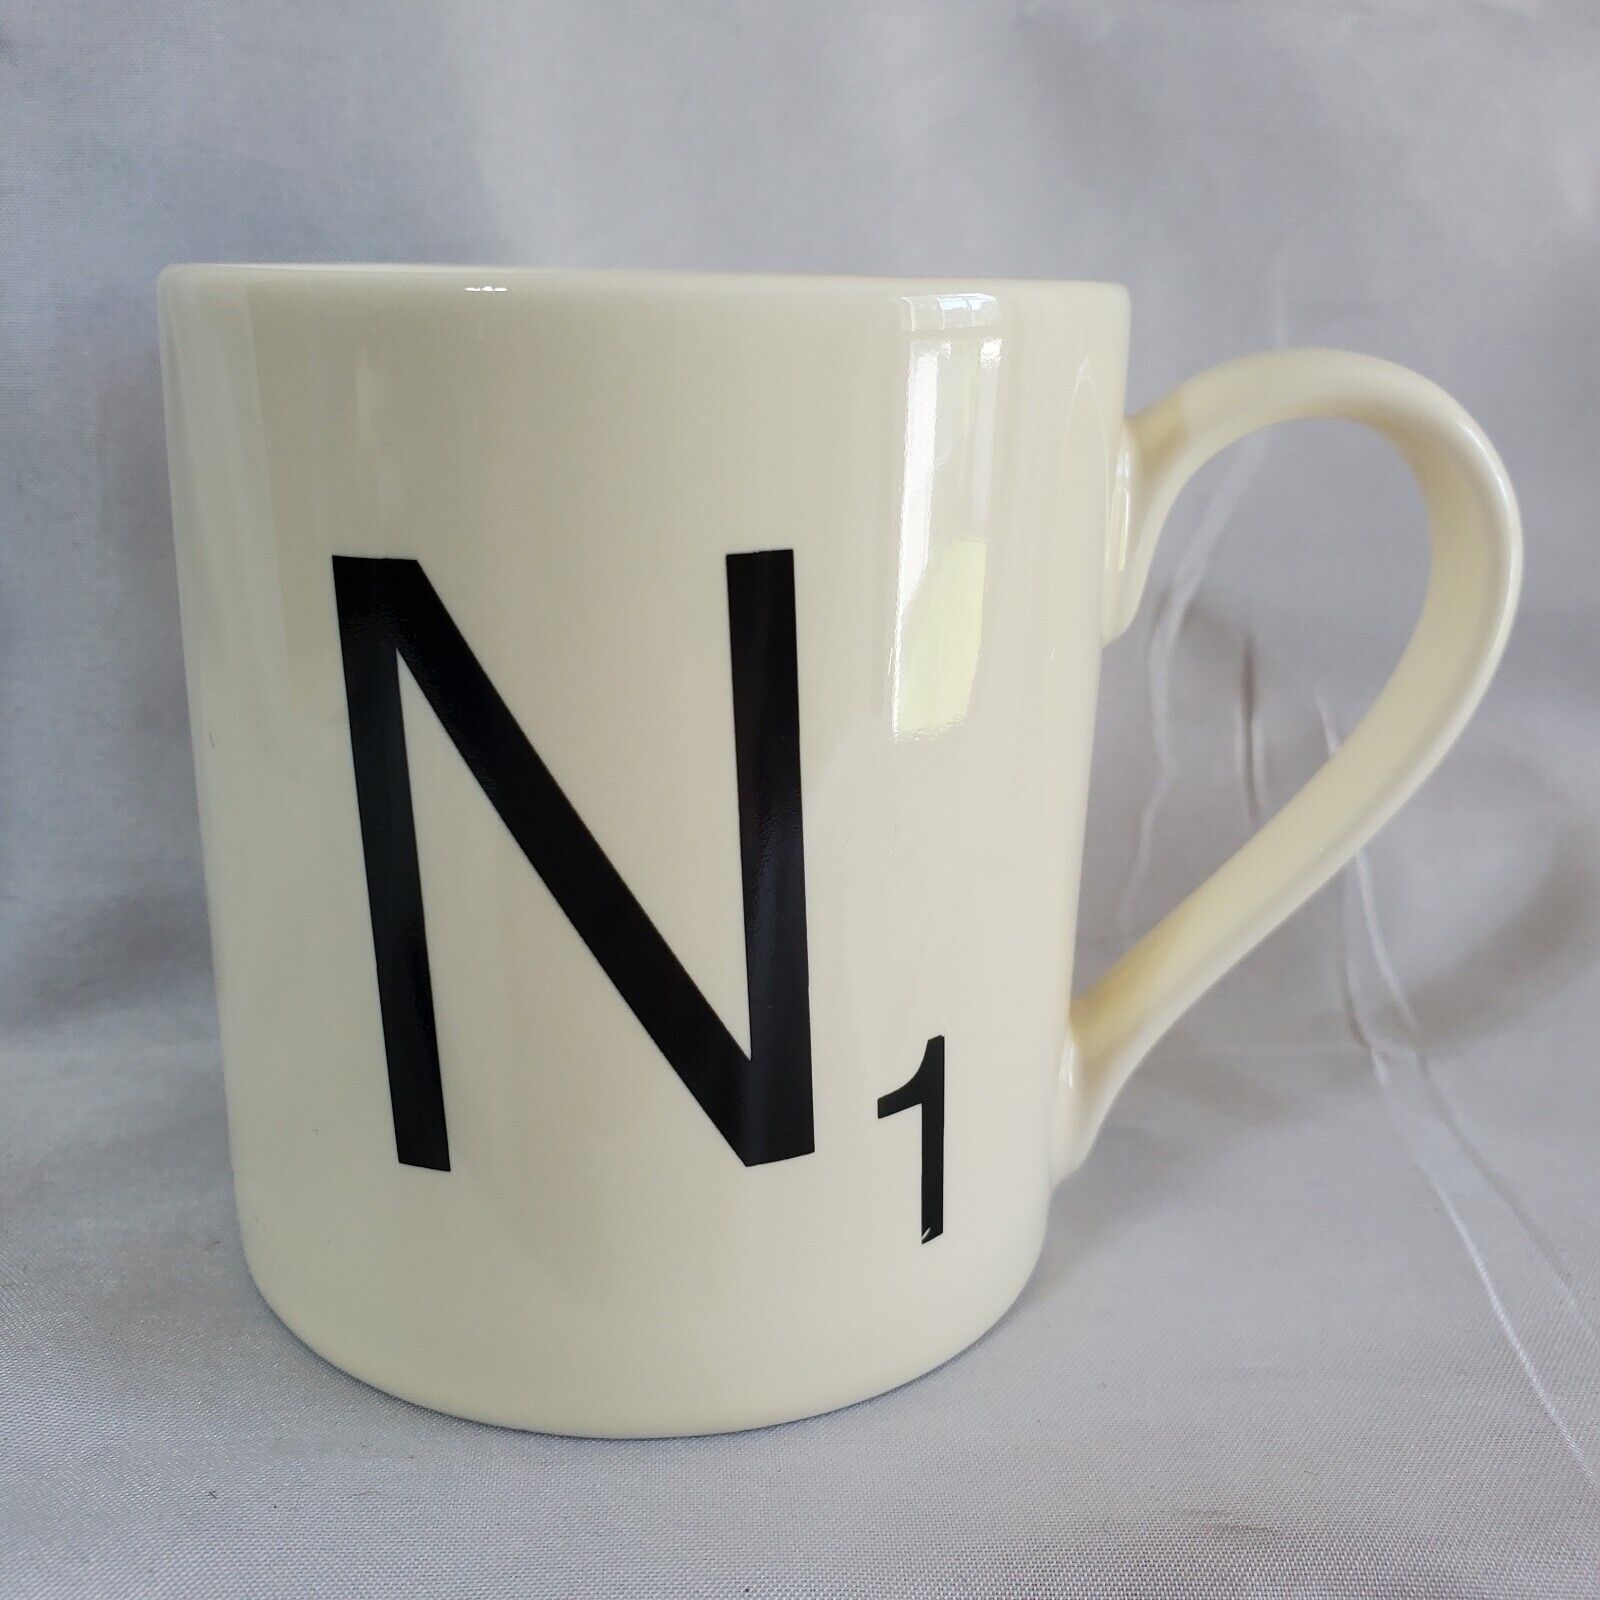 2013 Scrabble Letter N1 Coffee Cup / Mug By Wild & Wolf